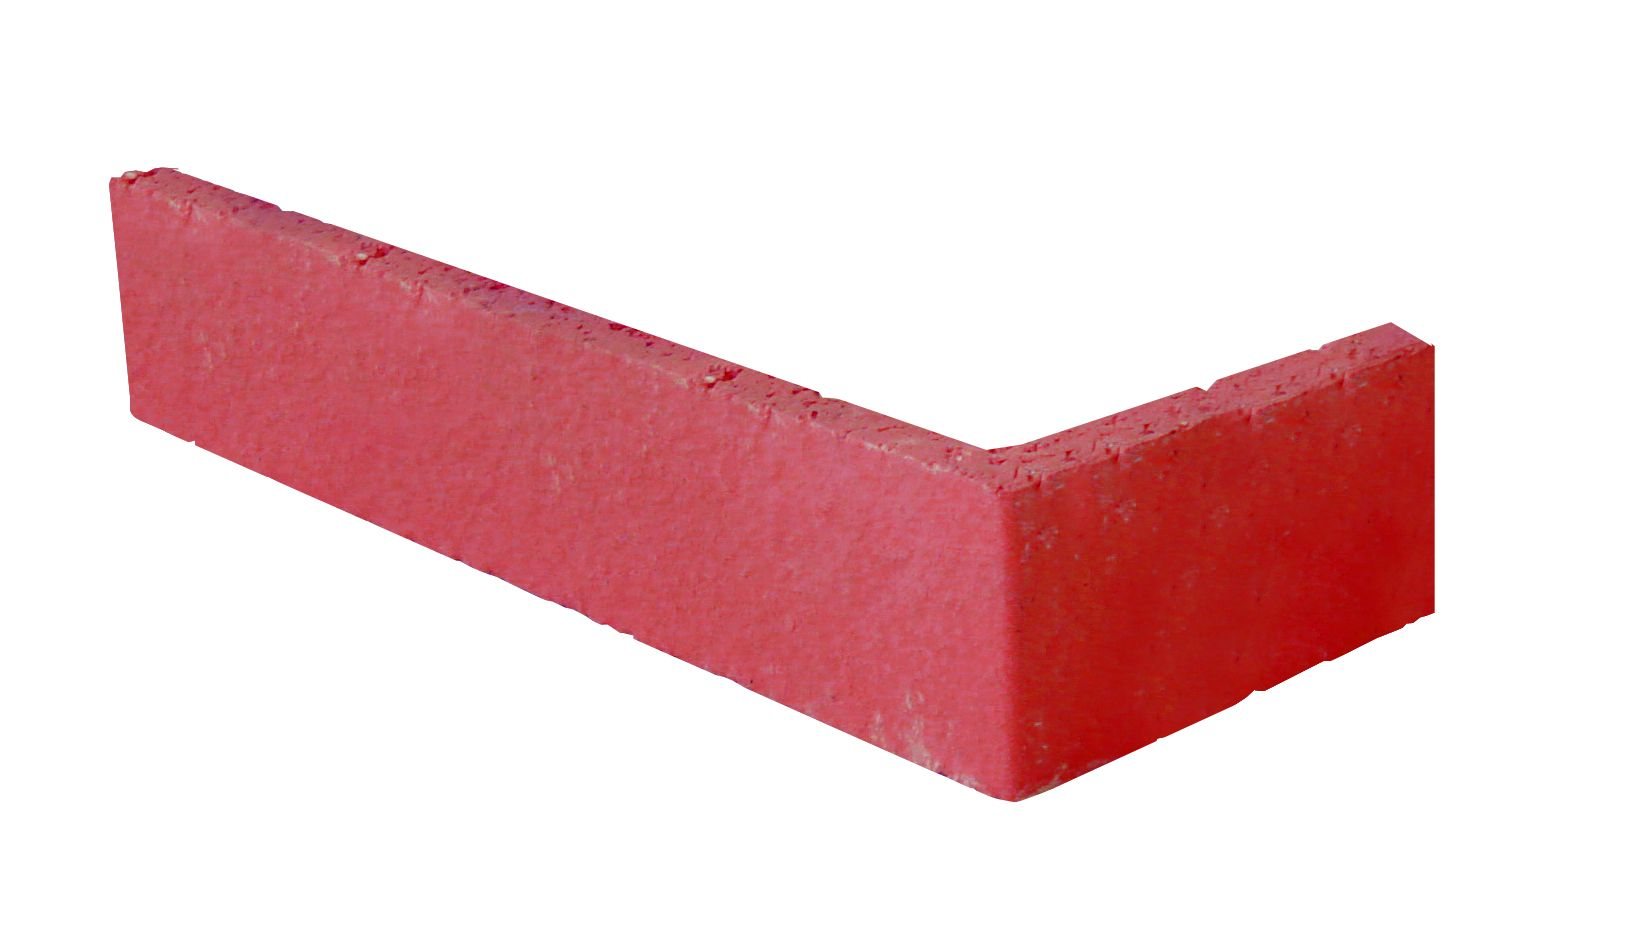 plaquette-angle-1-5x5x10-5x22-rouge-lisse-terreal-0